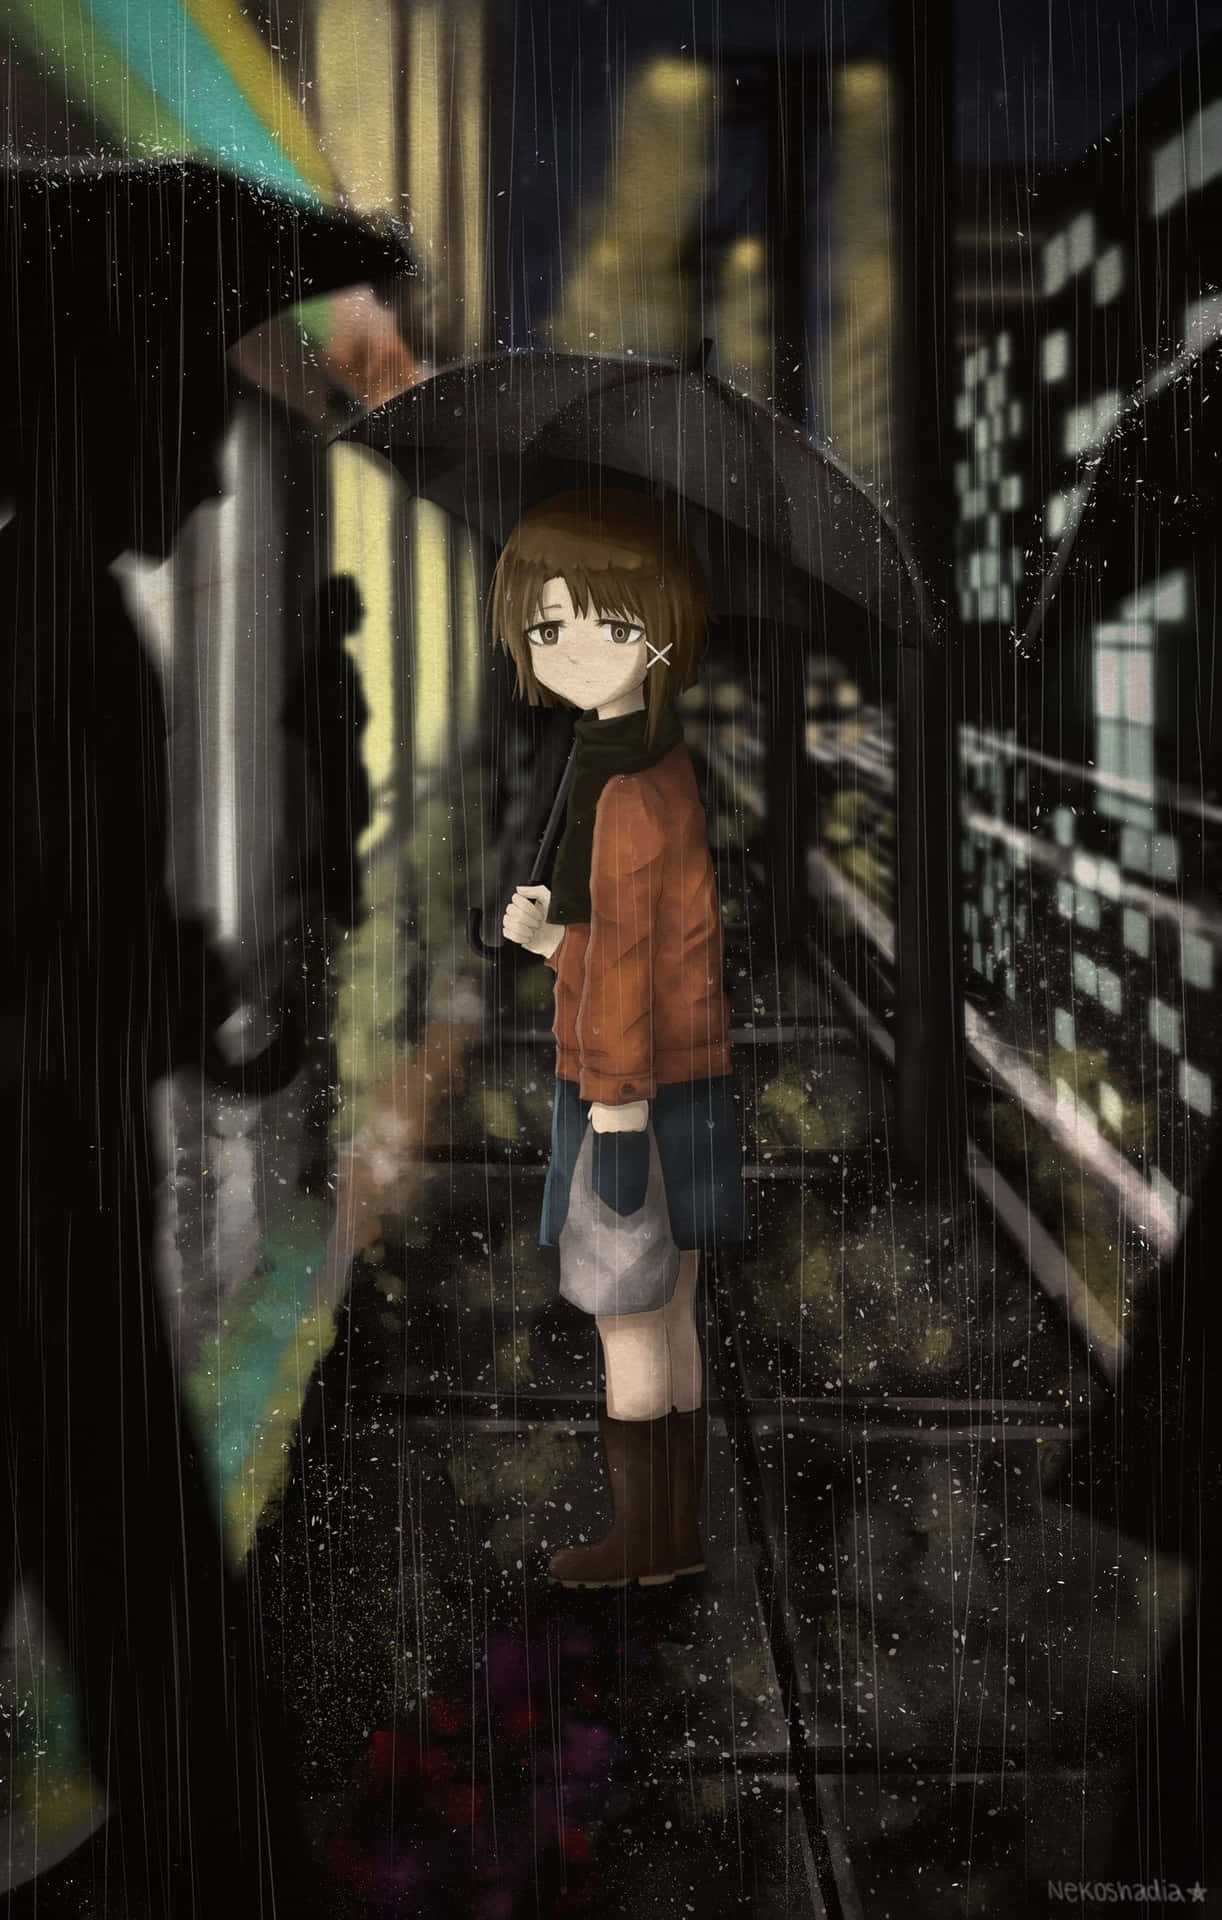 A Girl With An Umbrella Standing In The Rain